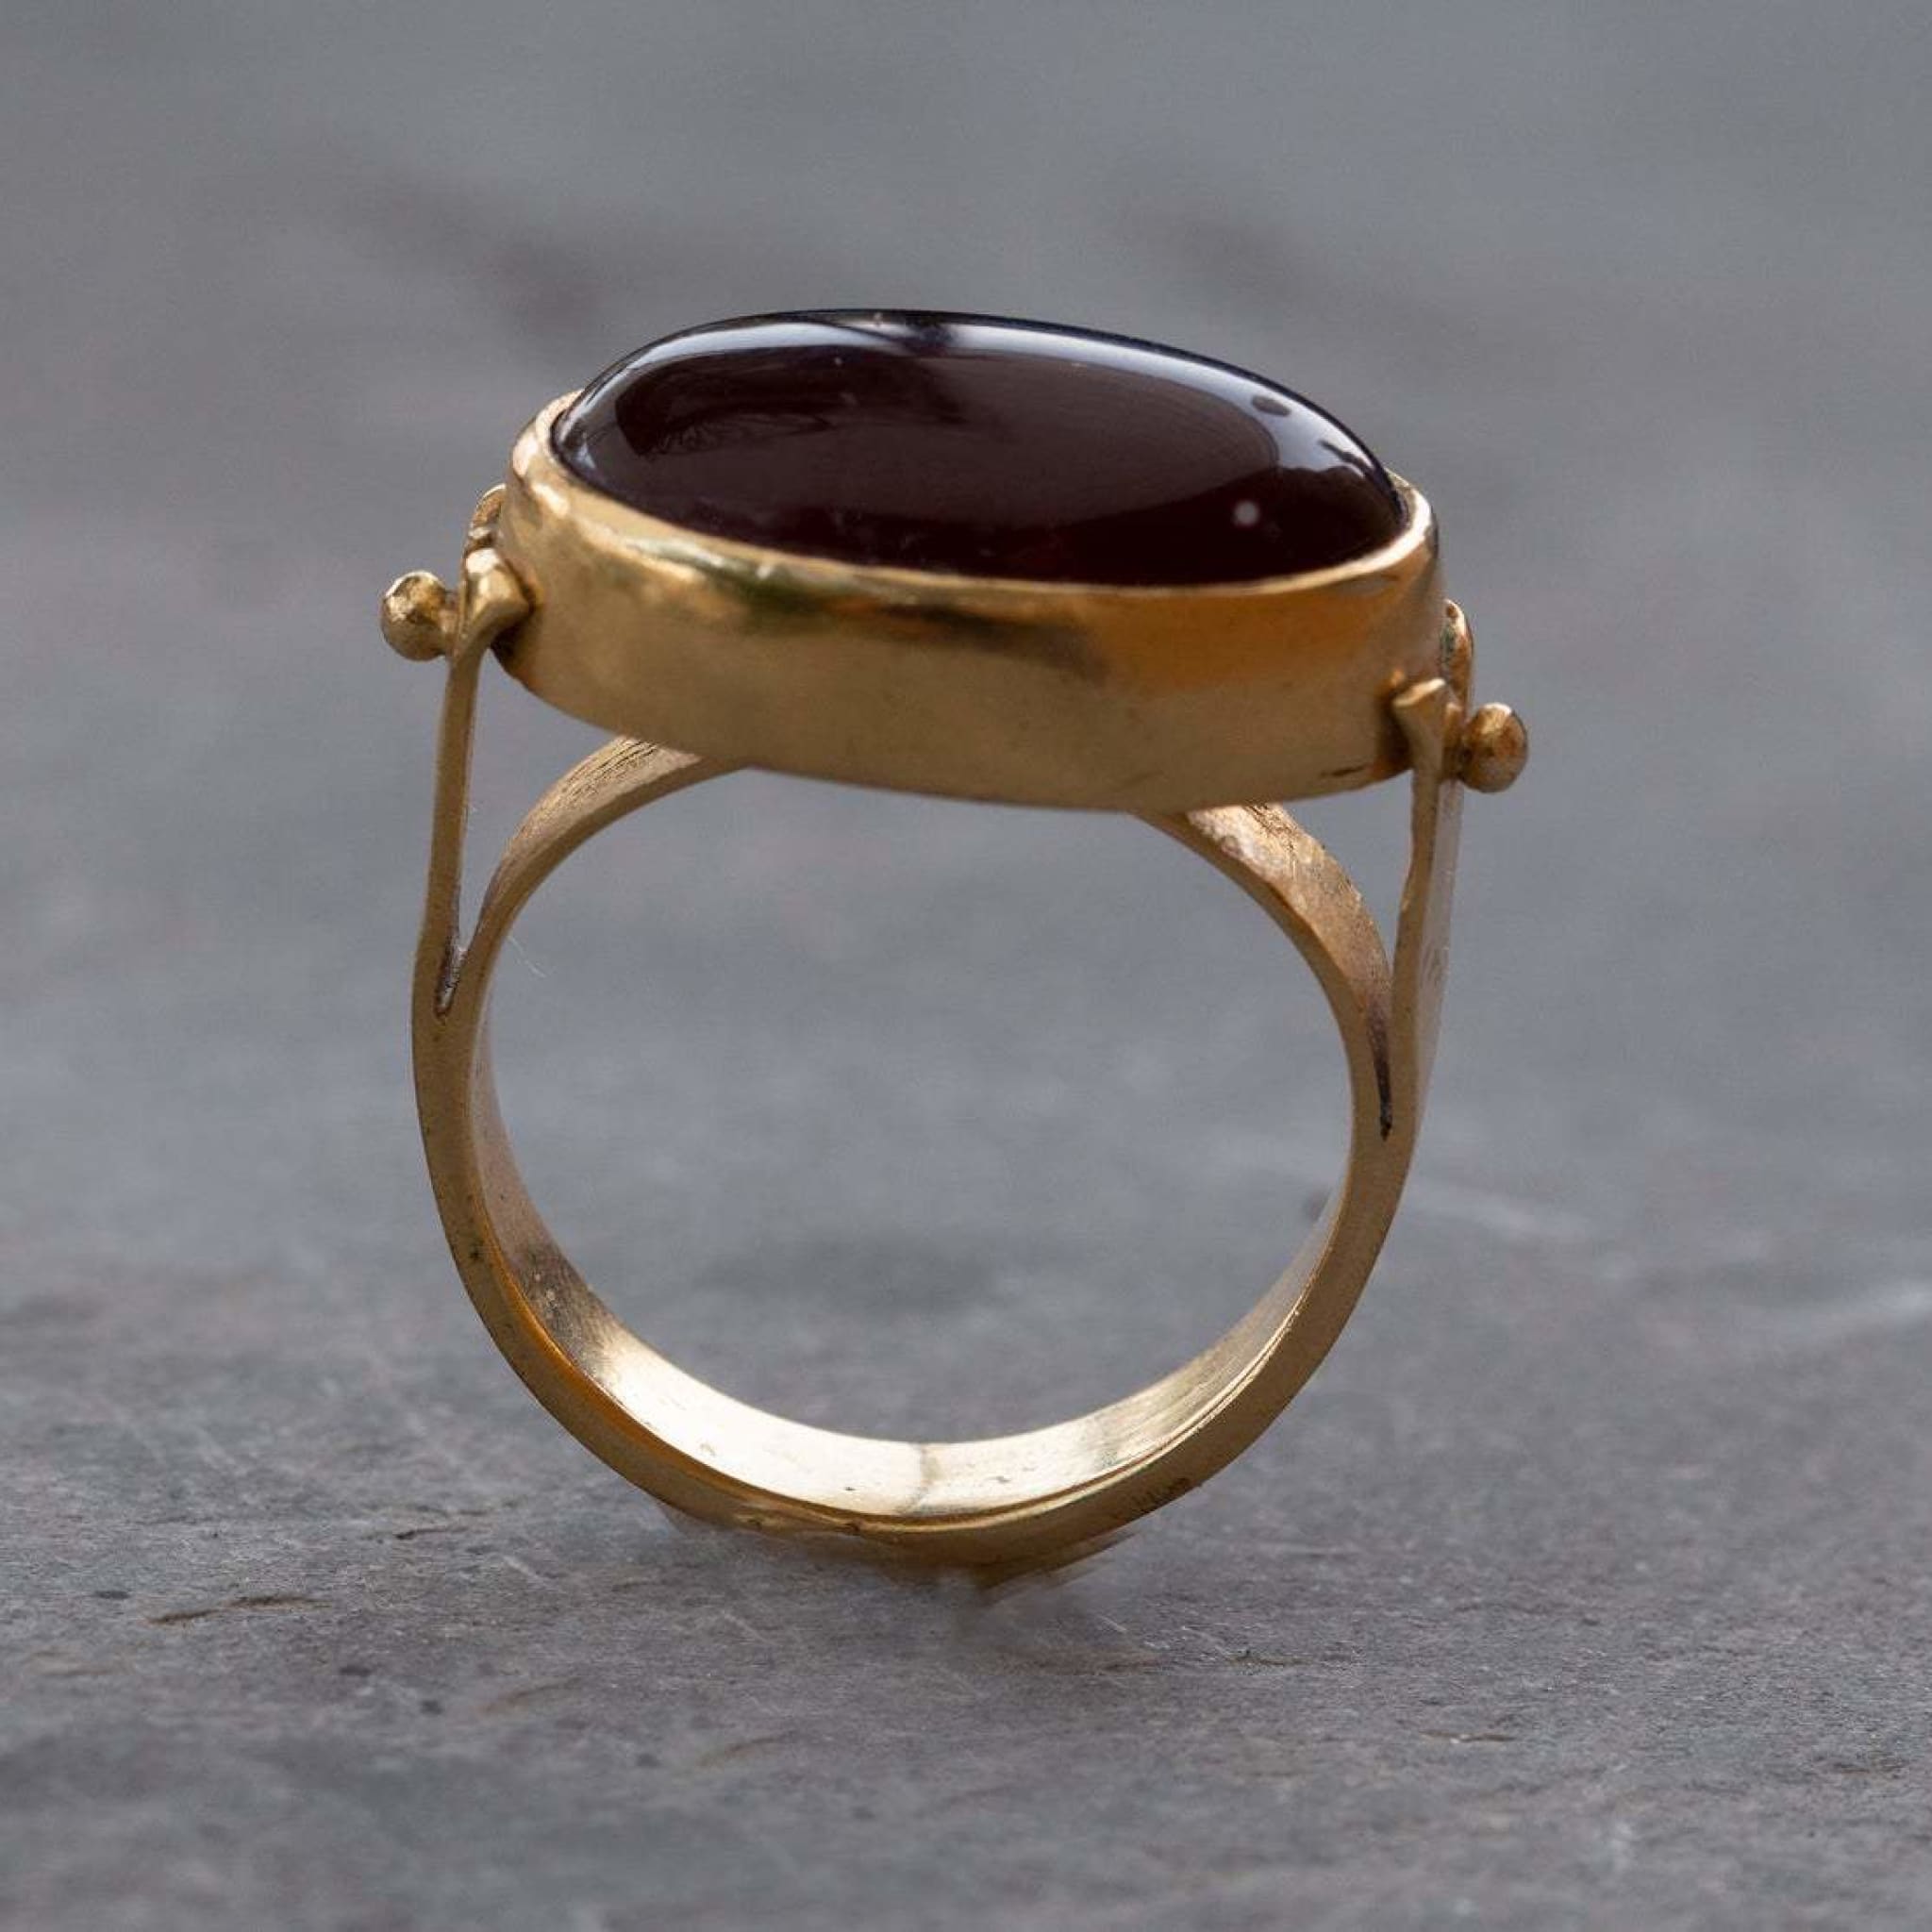 14k Gold Ring with Oval Carnelian Stone